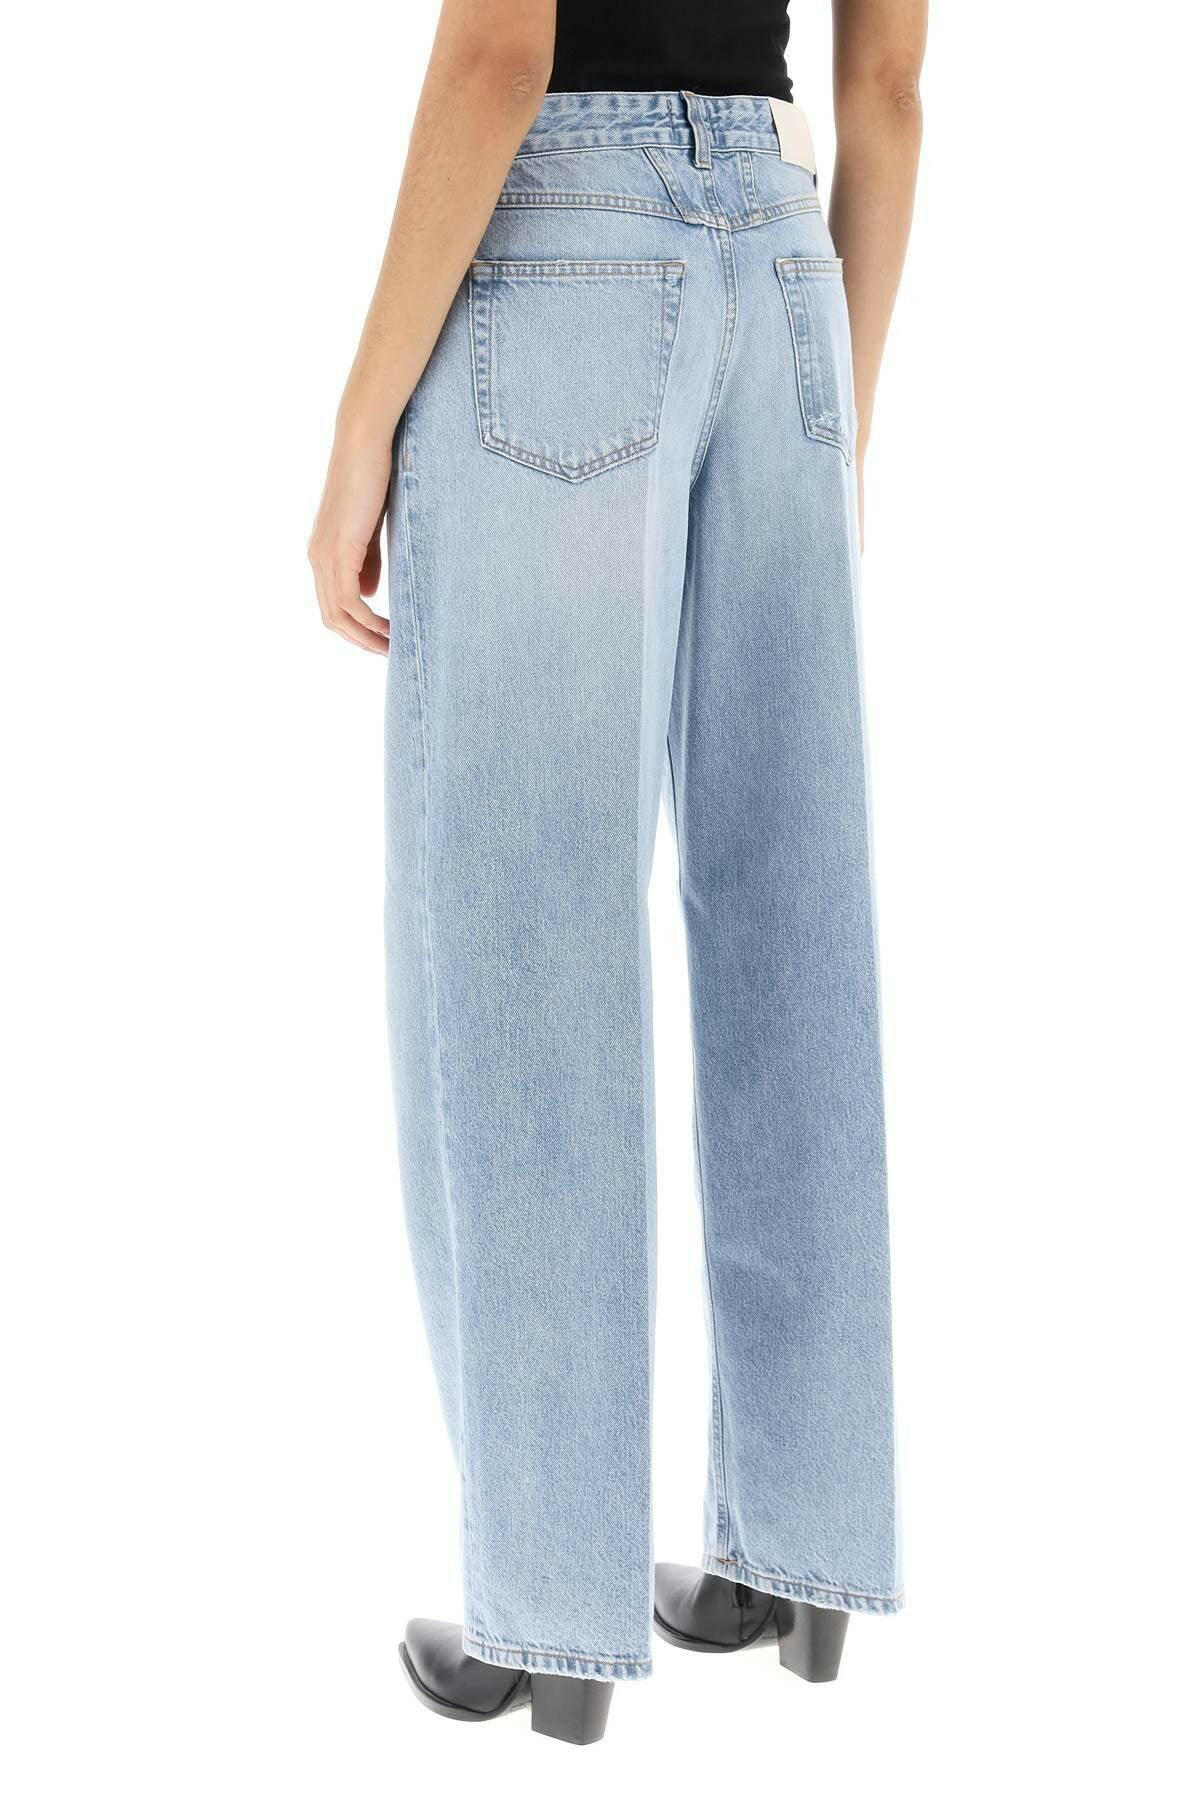 Closed Loose Jeans With Tapered Cut - JOHN JULIA